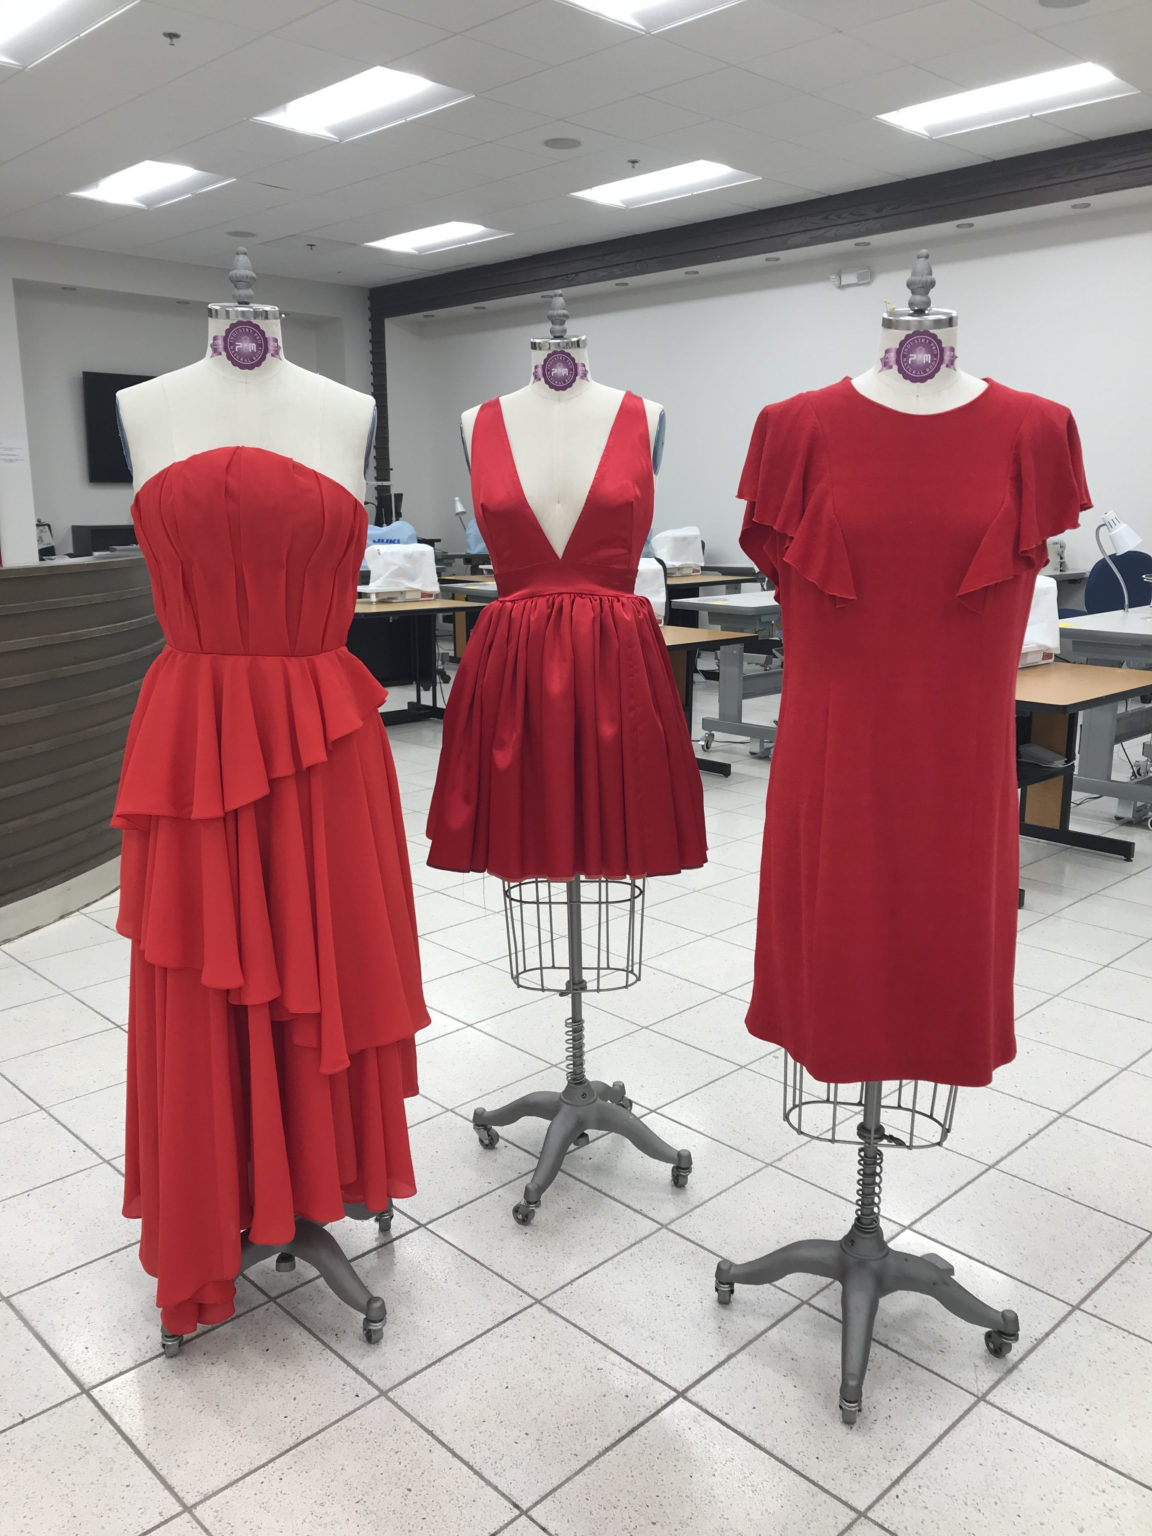 community colleges with fashion design programs